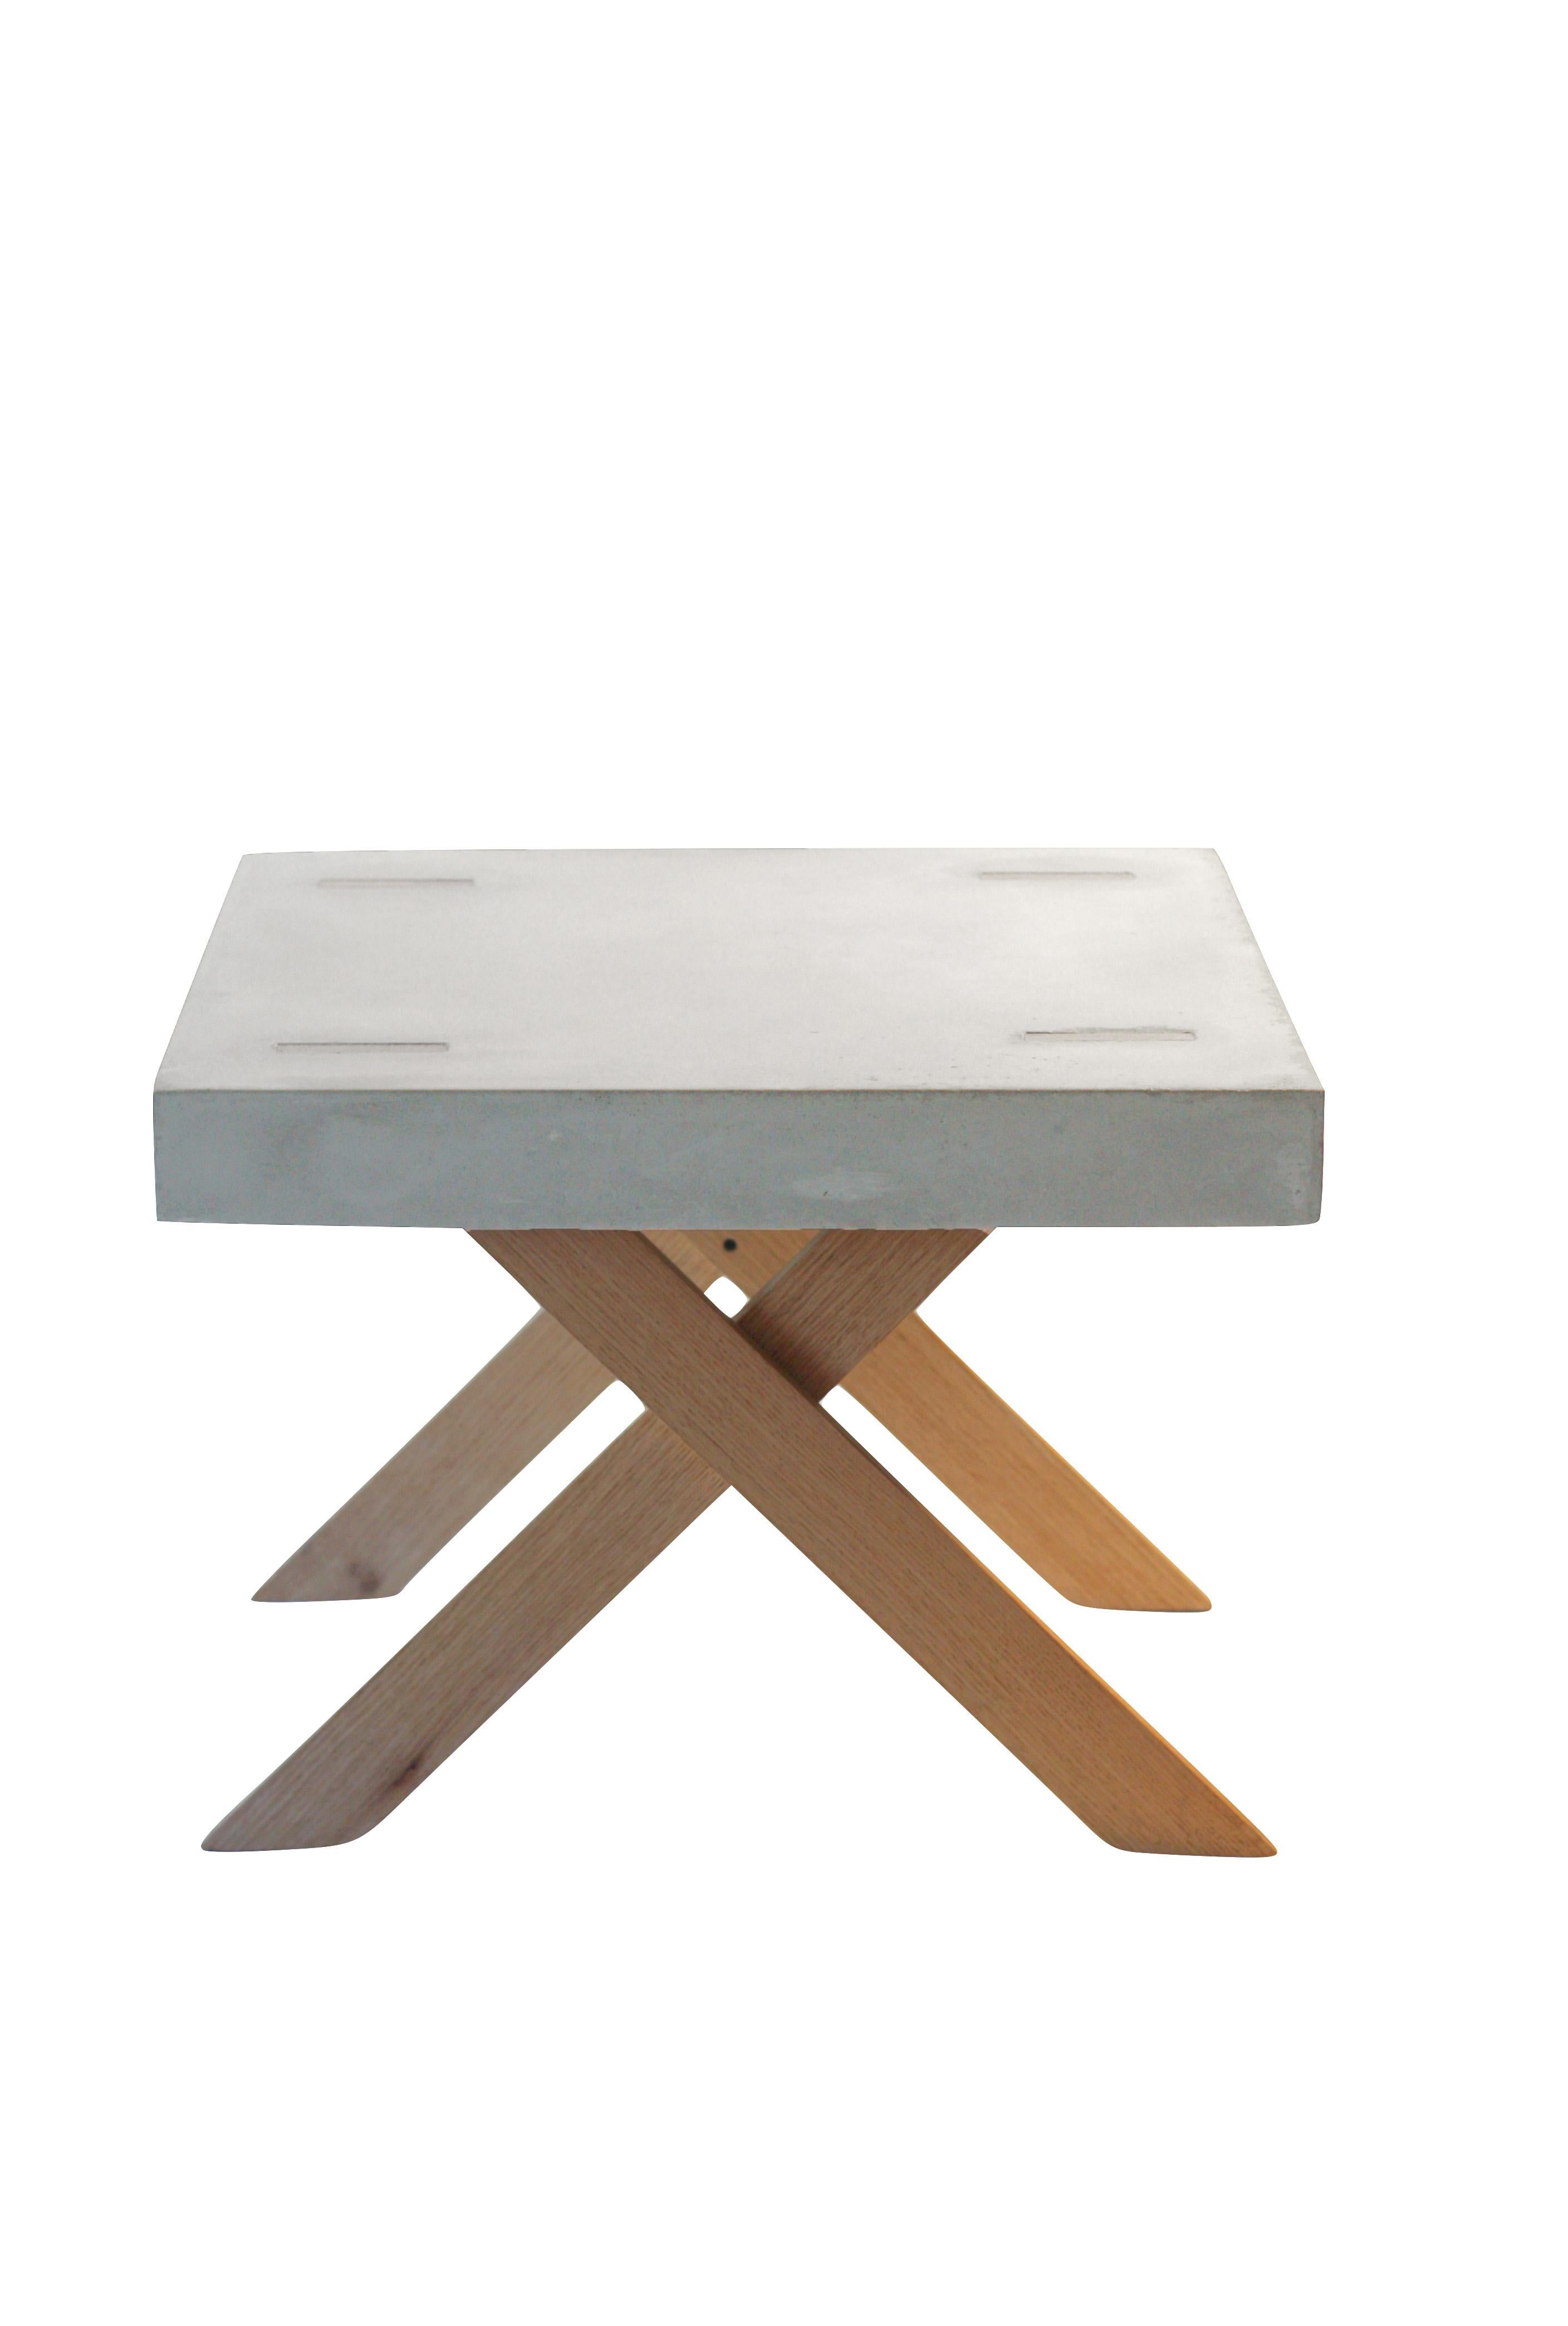 GFRC Concrete coffee table with red oak wood 
Standard Color options: off-White, Gray, Charcoal
Custom Colors available upon request
Alternate Wood options: White Oak wood (+$100), Mahogany (+$`150), Teak wood (+$200)
Fiberglass Reinforced